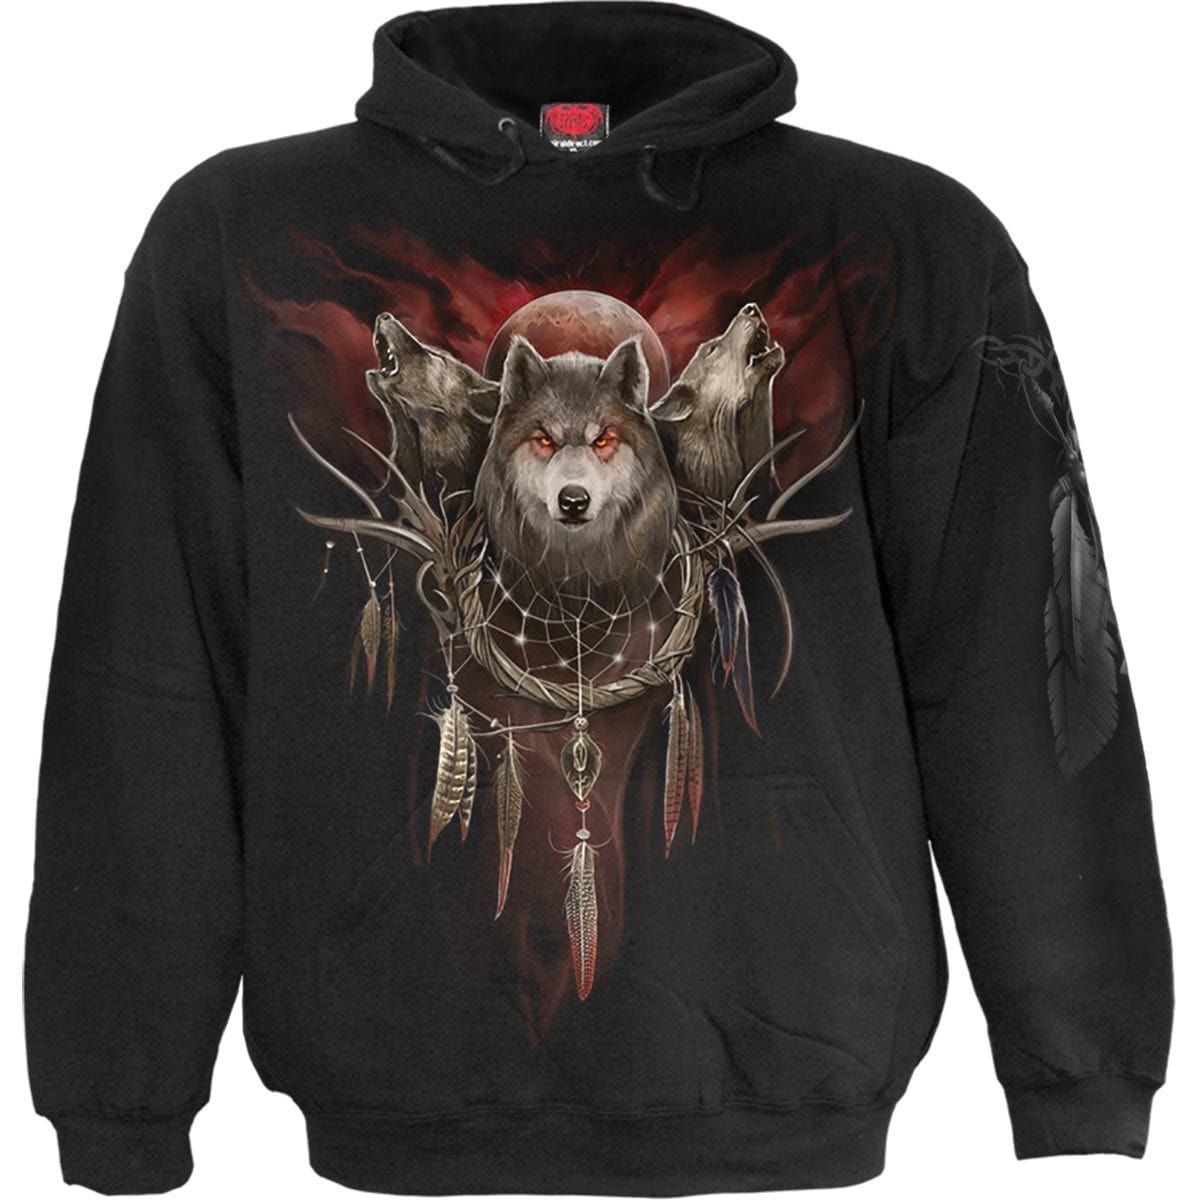 CRY OF THE WOLF - Hoody Black - Spiral USA